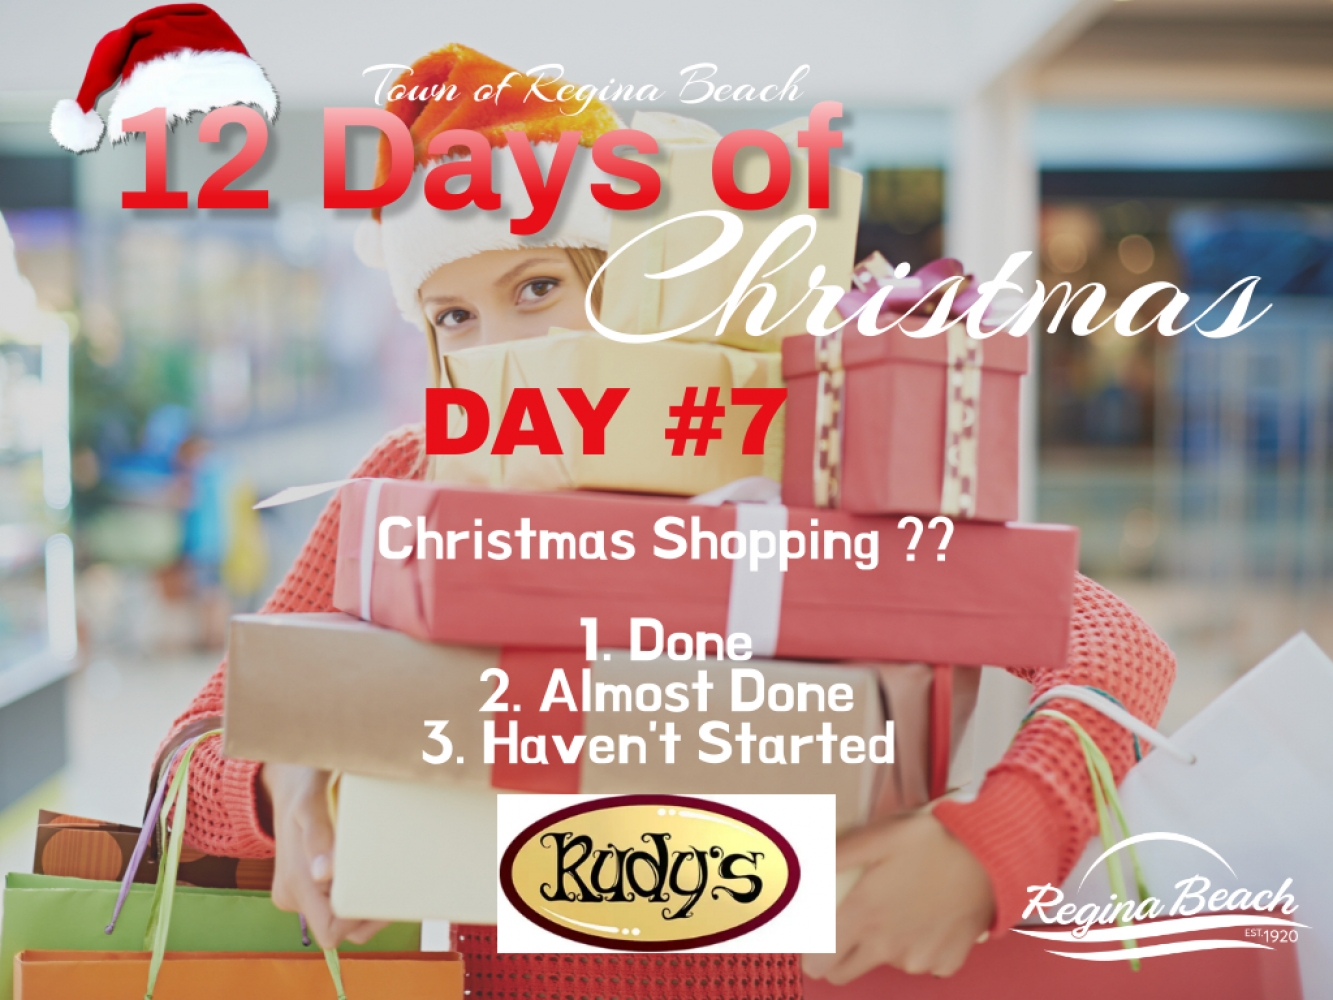 Day #7 of Our 12 Days of Christmas